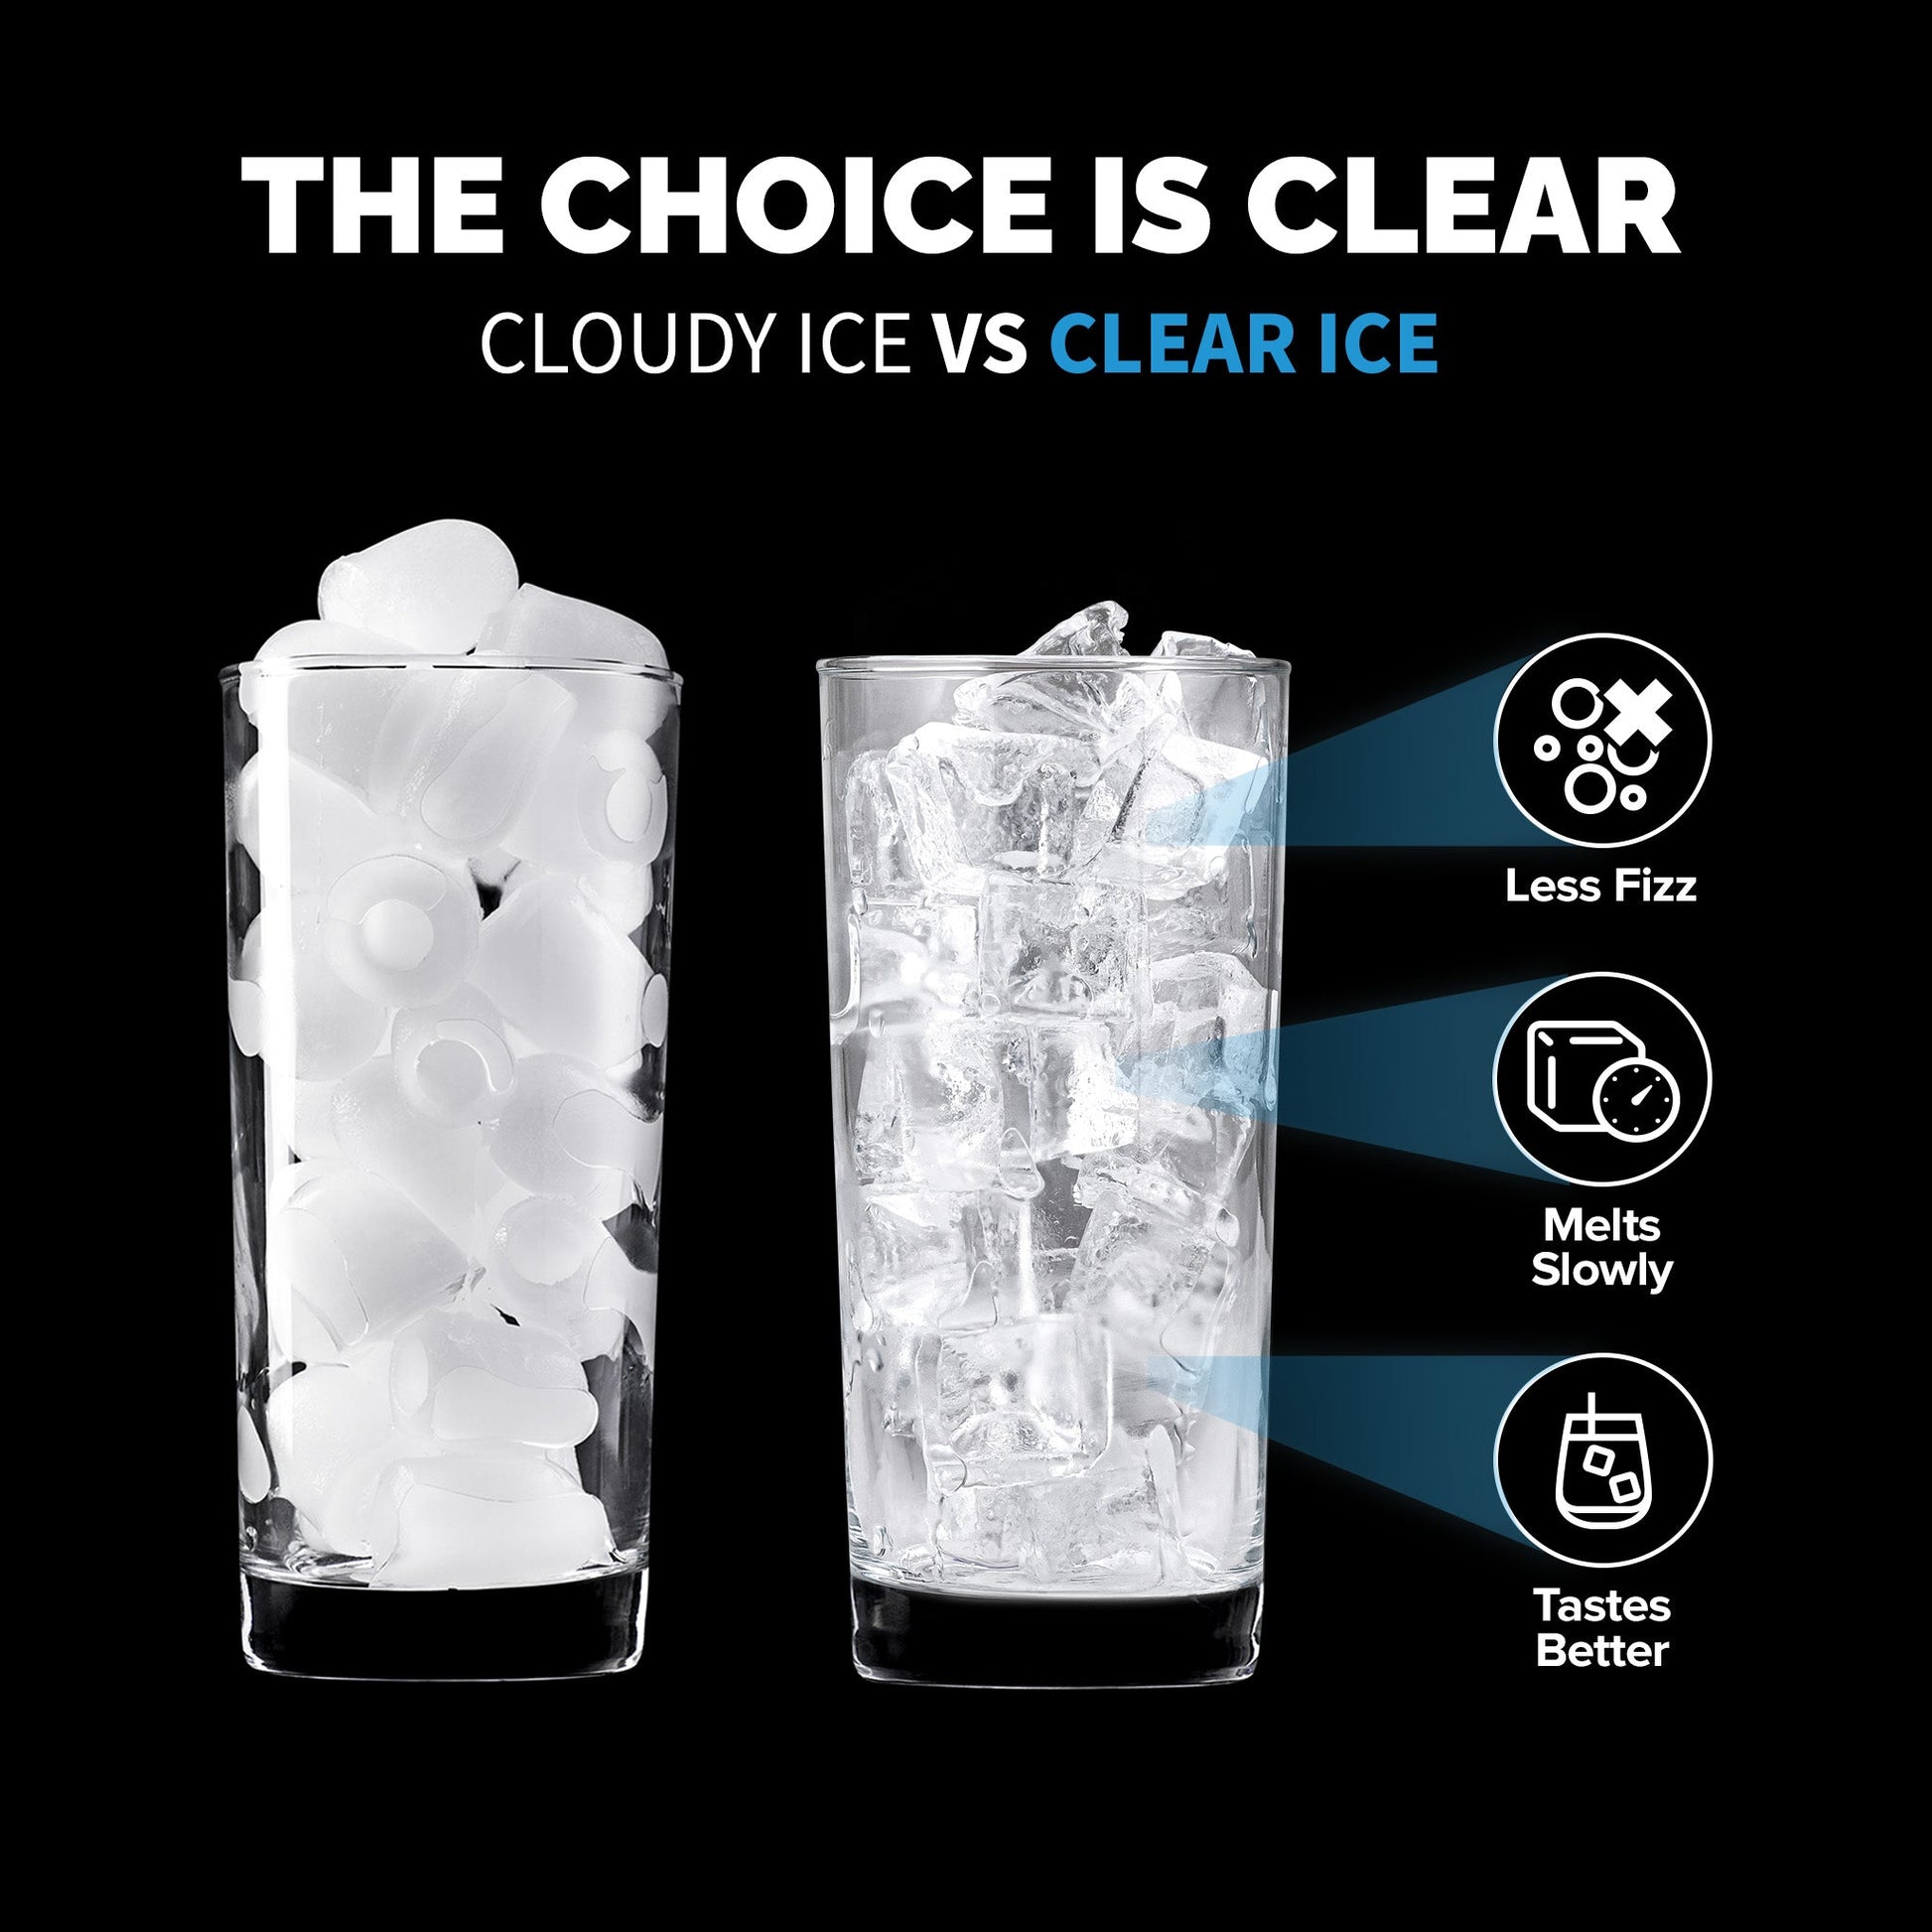 Newair 15” Undercounter 80lb lbs. Daily Clear Ice Cube Maker Machine, Built-in or Freestanding Design, 40 Cubes ready in 15-30 Mins, Fingerprint Resistant Door, Self-Cleaning Function, LED Controls, 24 Hr. Timer, Scoop Included, Ice Thickness Controls